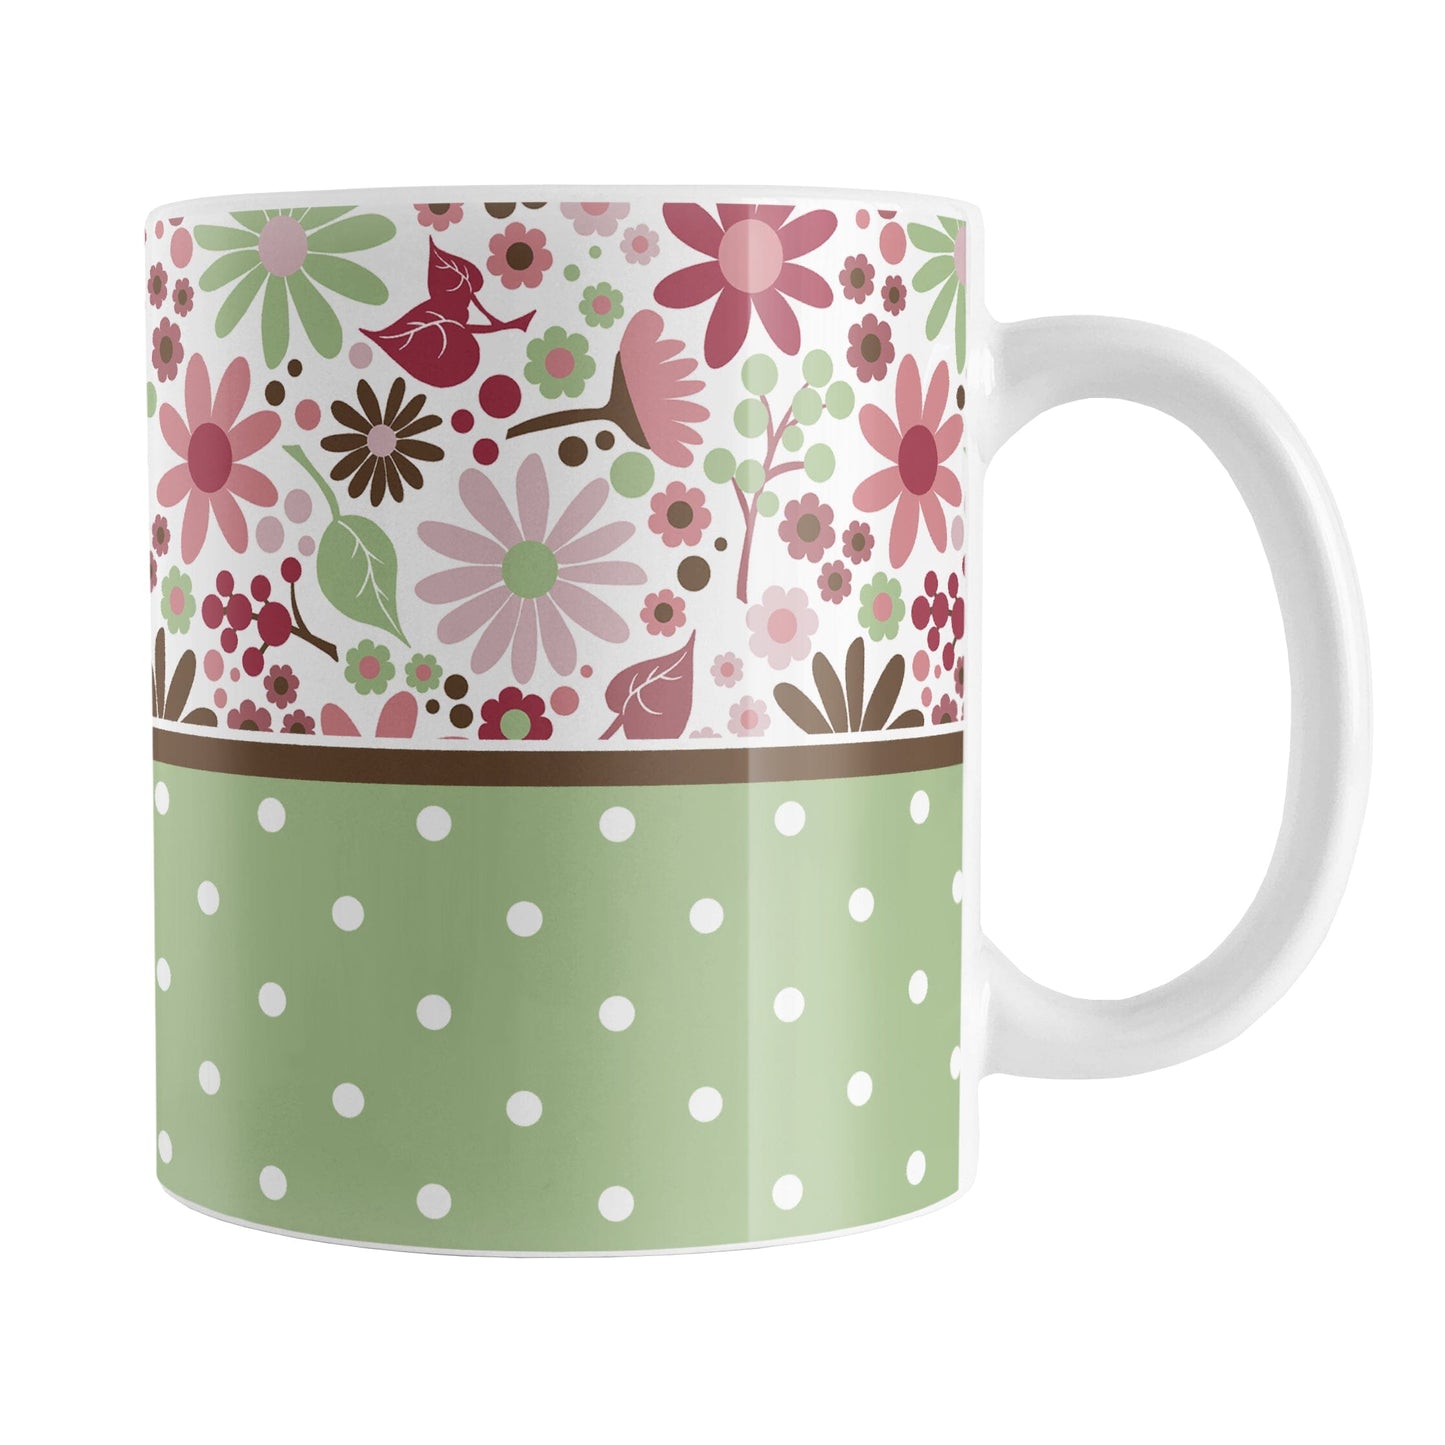 Berry Green Summer Flowers Polka Dot Mug (11oz) at Amy's Coffee Mugs. A ceramic coffee mug designed with a pretty floral pattern in a gorgeous berry pink color palette, with sage green and brown along the top, and a green polka dot pattern along the bottom. These patterns wrap around the mug to the handle.